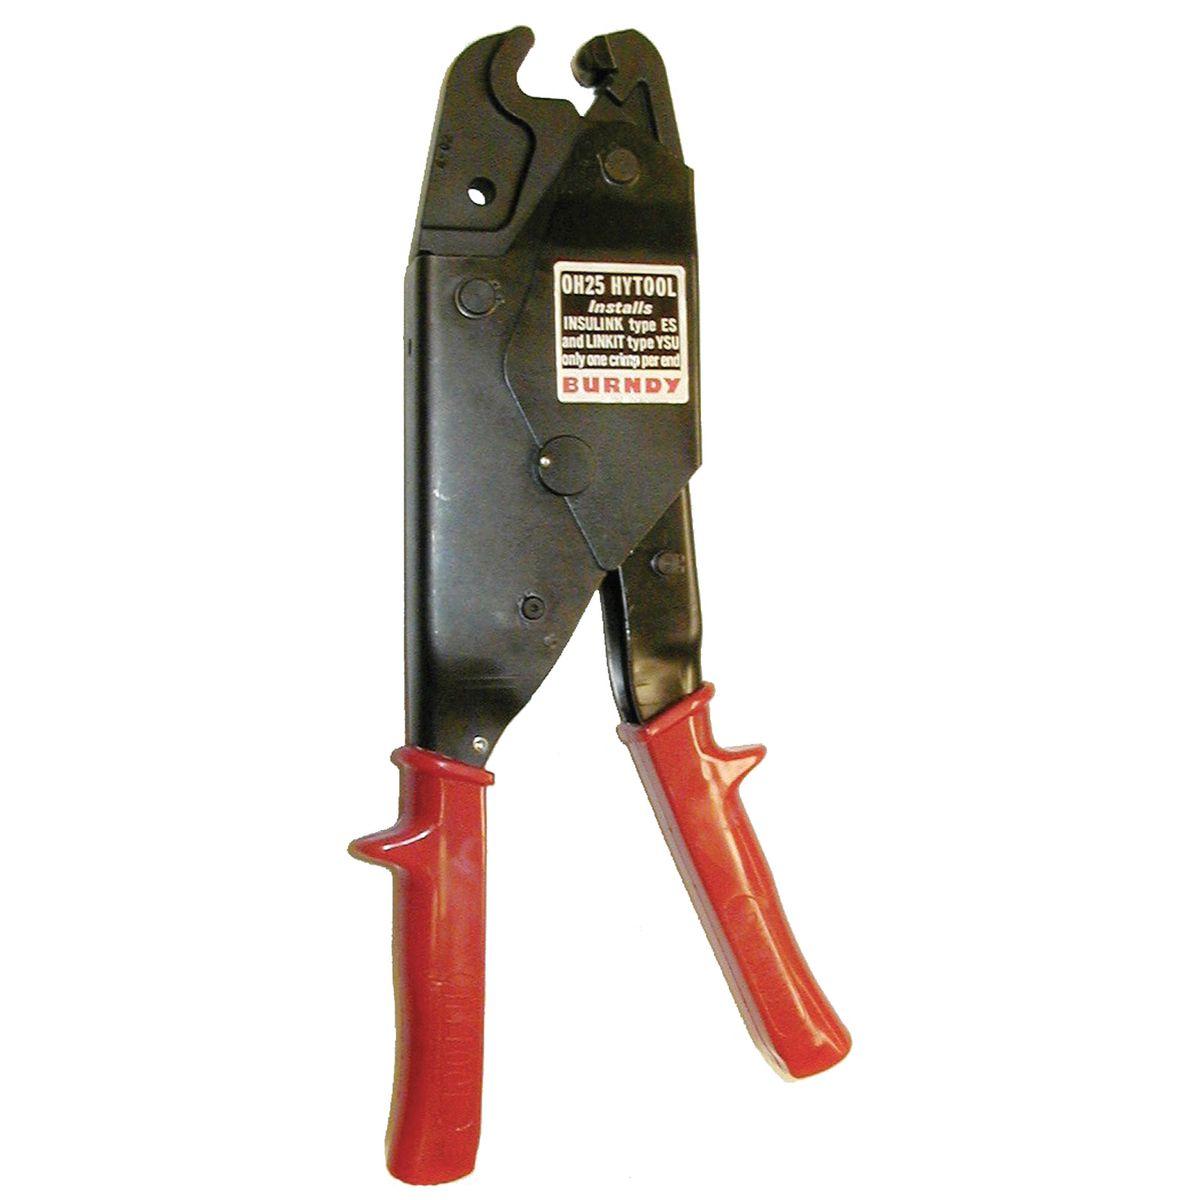 Hubbell OH25 Full Cycle Ratchet Crimper, Dieless, 6000 lbs, Installs Service Entrance Splice Connectors #10 AWG - #1/0 AWG  ; Heat treated steel ; 1/4" hole for snap fastener ; Forged steel jaws ; Nest die ; Comfort grip handles ; Spring loaded handles ; Protected rat